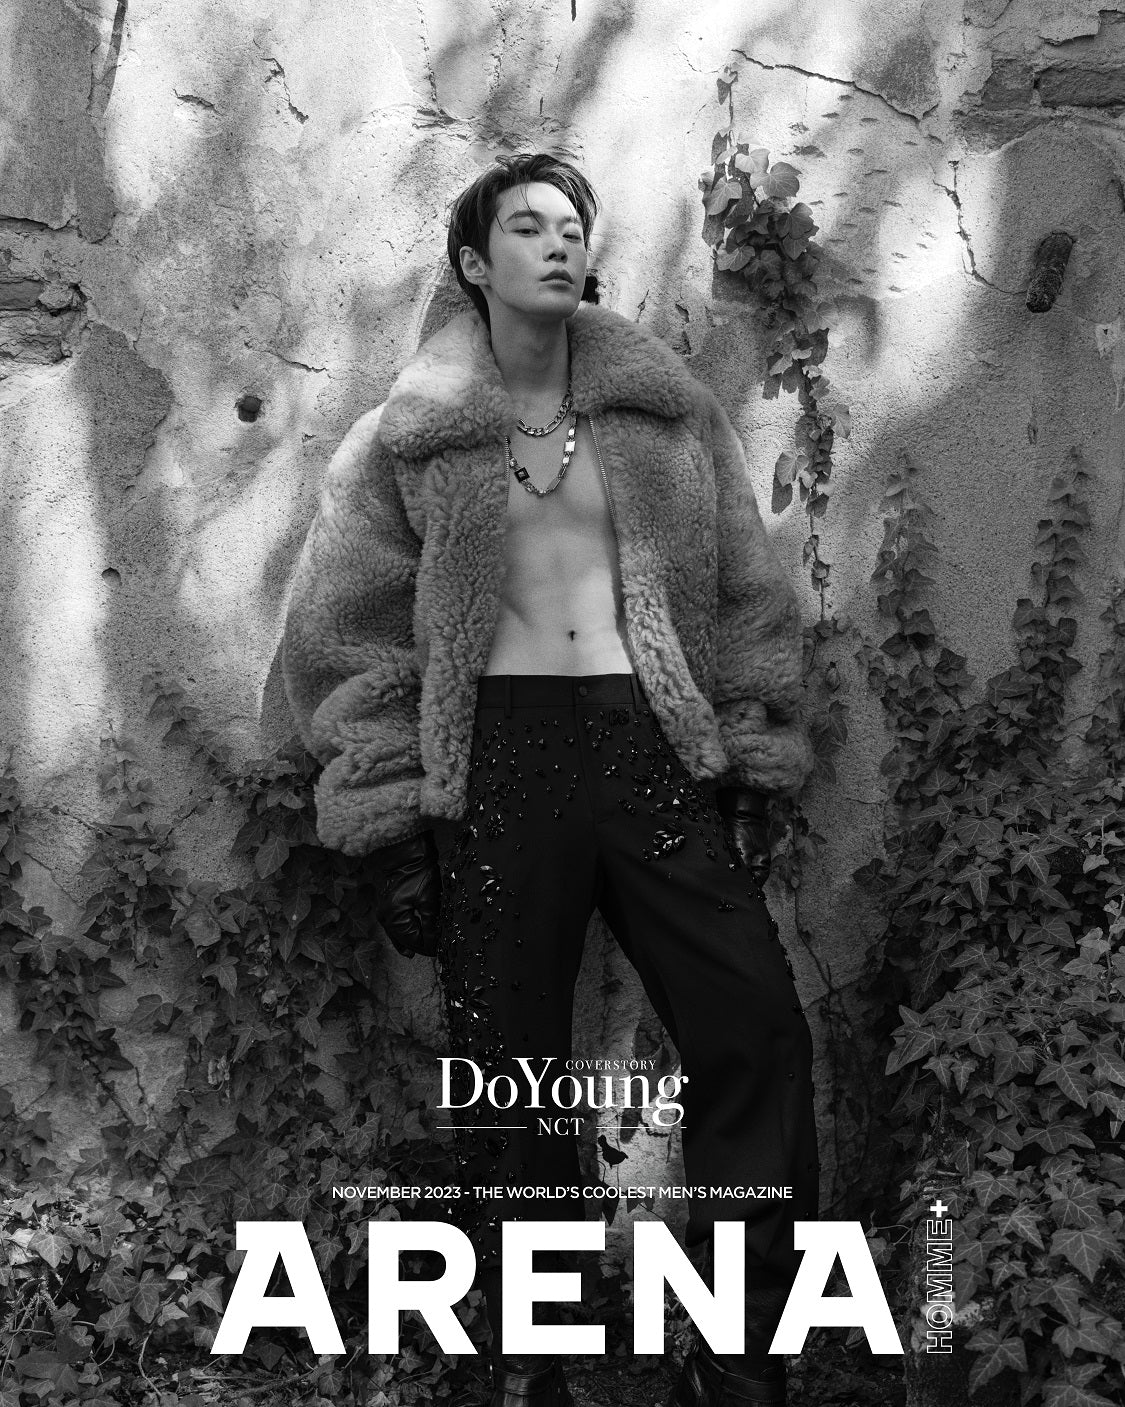 NCT DOYOUNG ARENA HOMME MAGAZINE 2023 NOVEMBER ISSUE